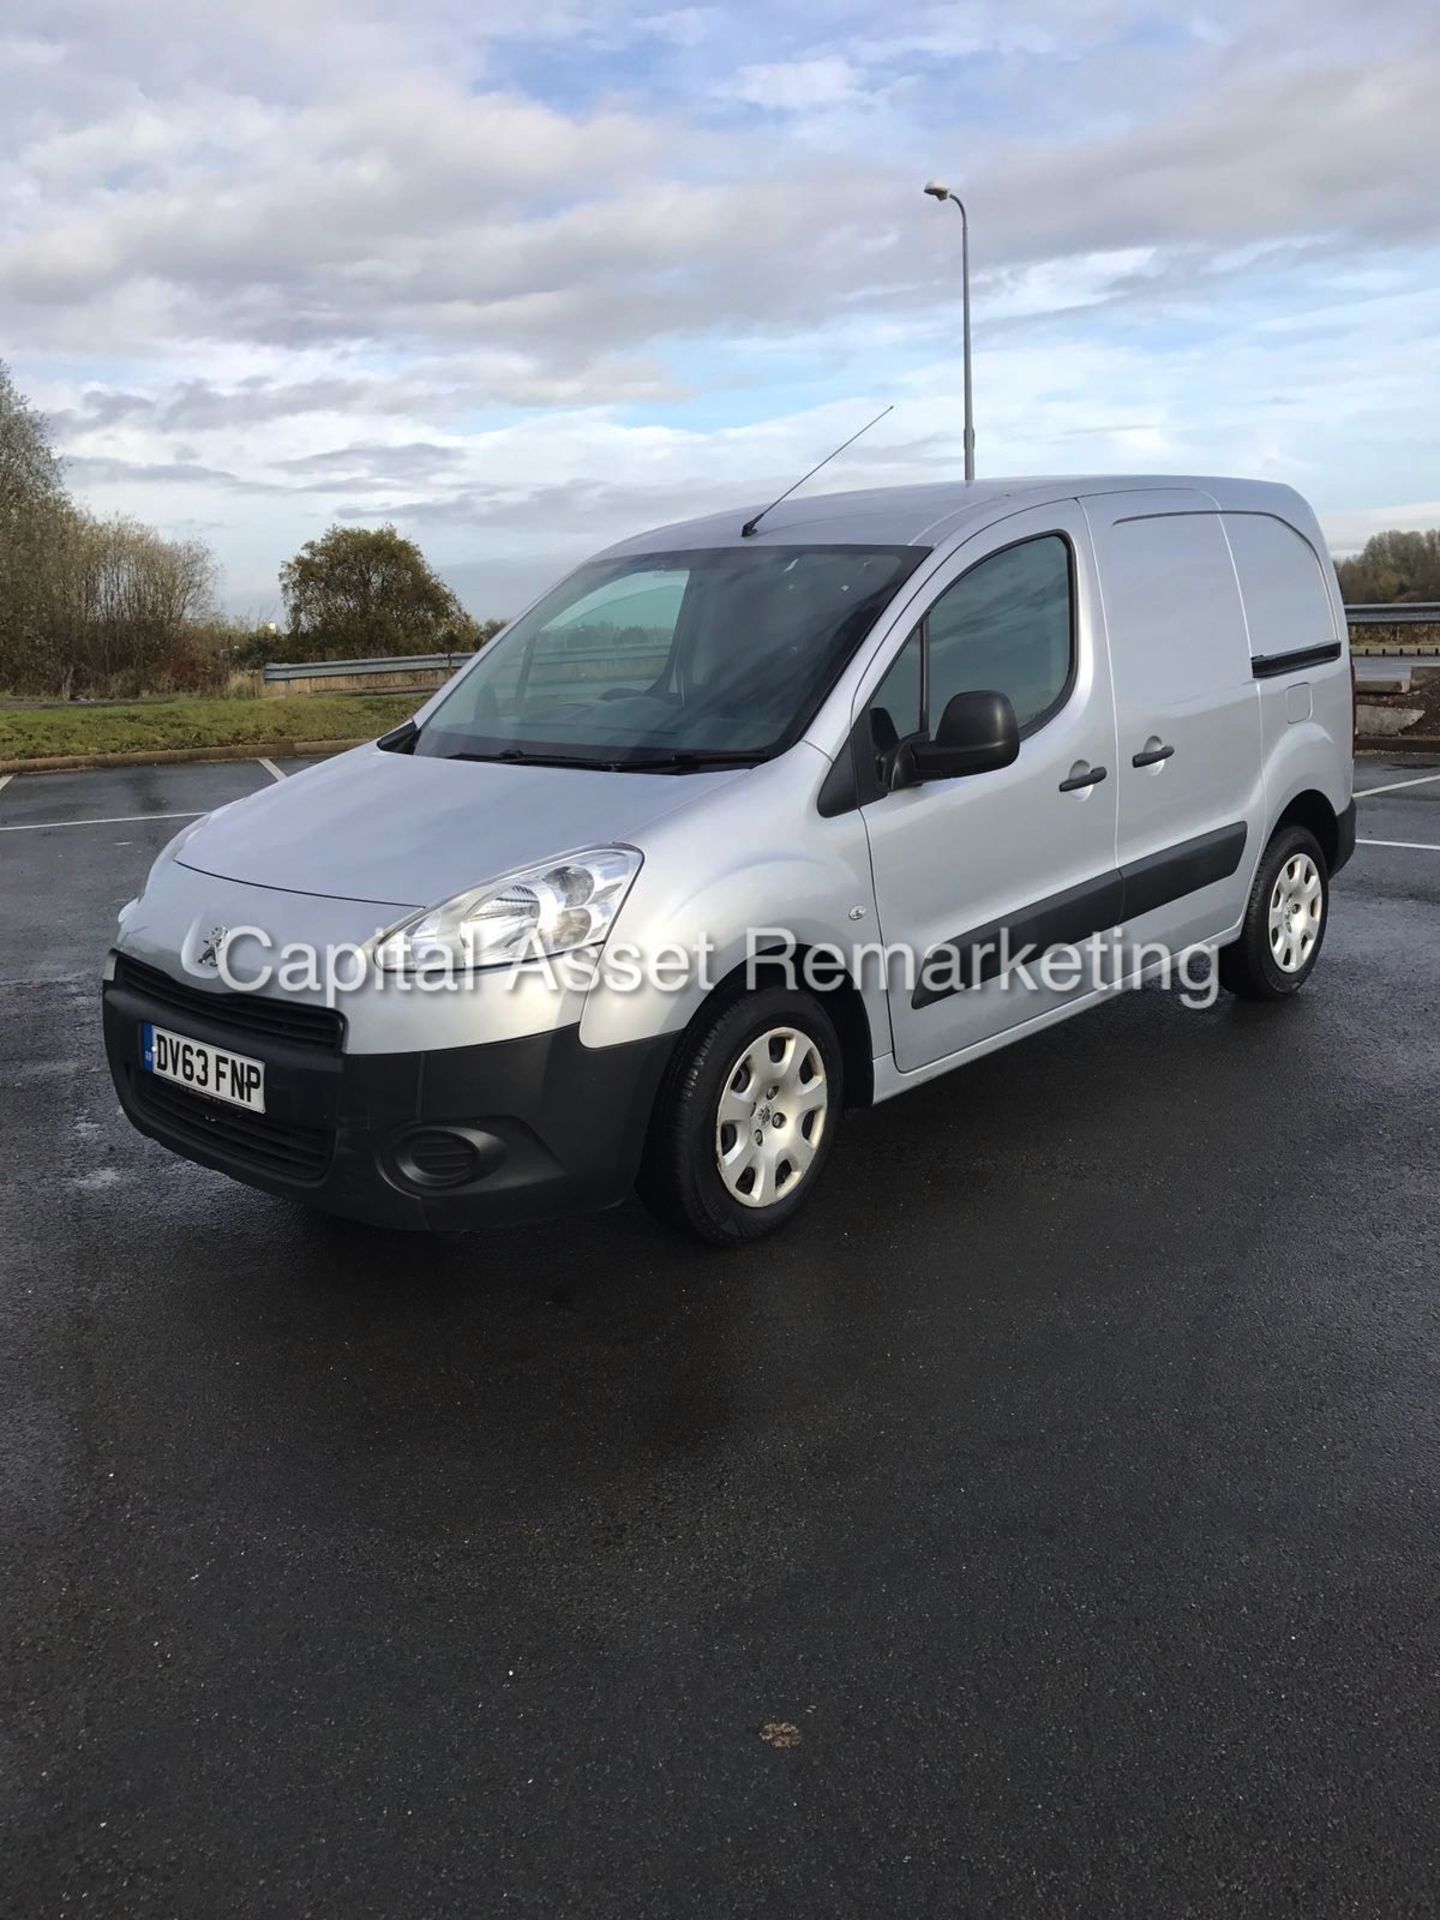 PEUGEOT PARTNER 1.6HDI "PROFESSIONAL" STOP/START - AIR CON - MASSIVE SPEC - SILVER - (2014) MODEL!!! - Image 4 of 12